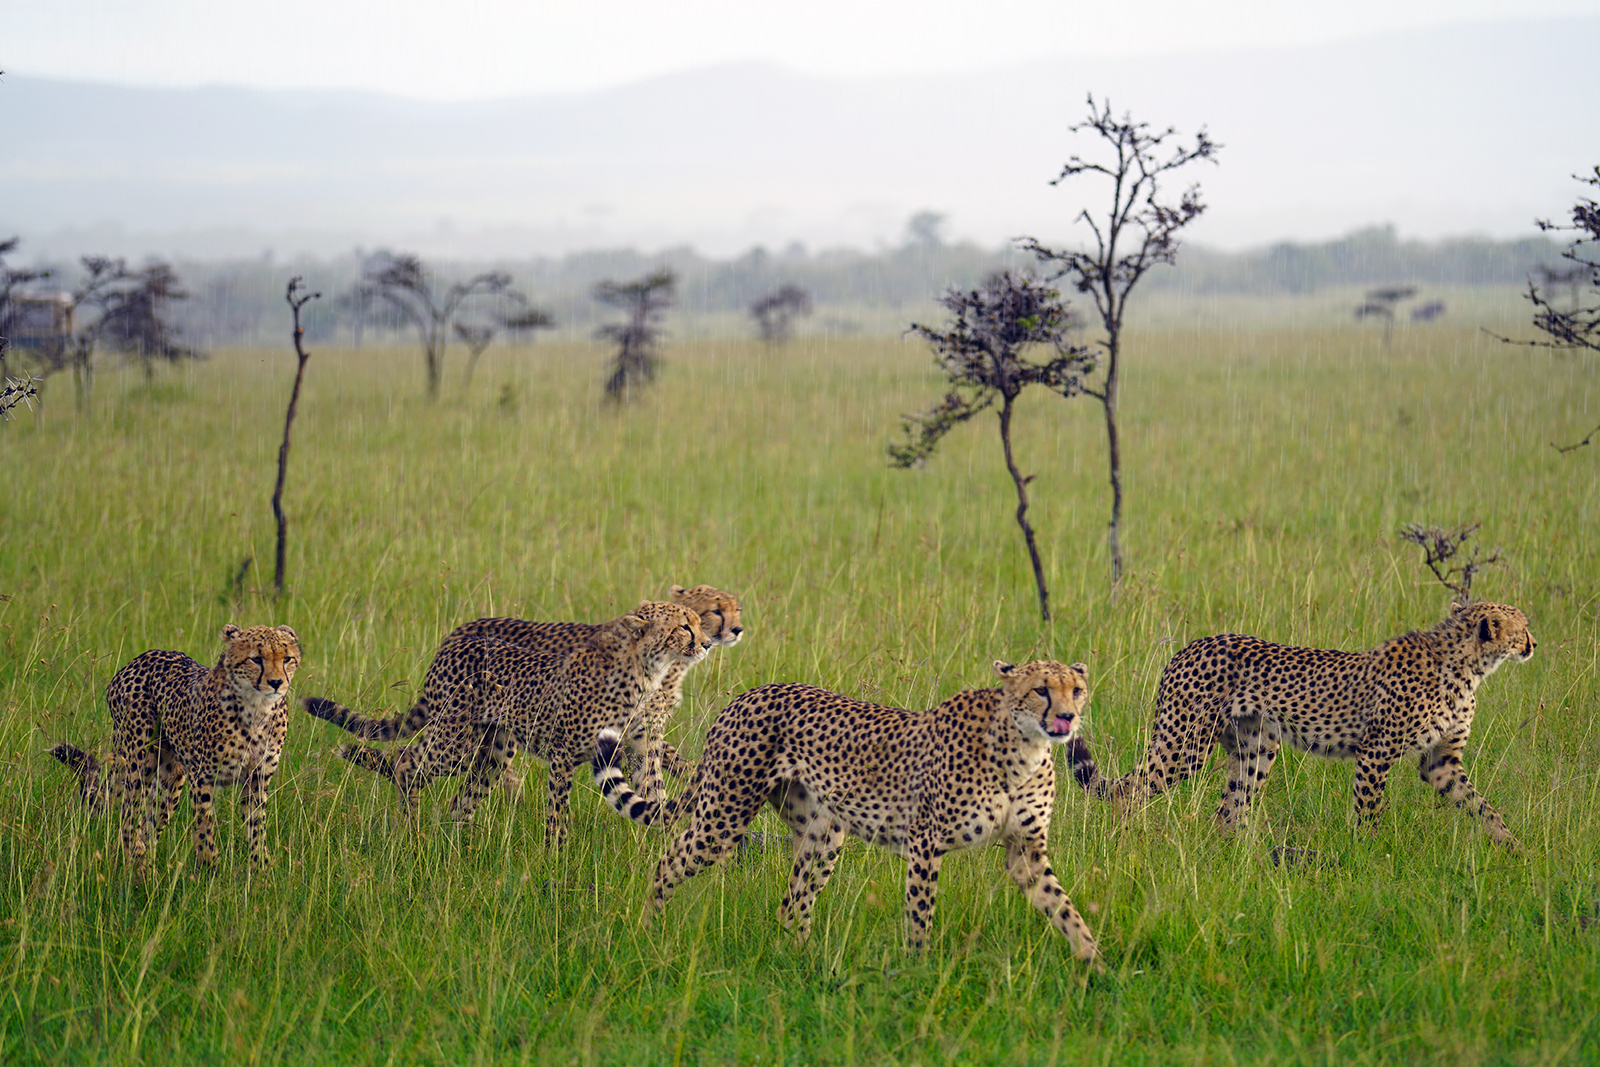 On our first evening game drive, we saw cheetahs on the hunt